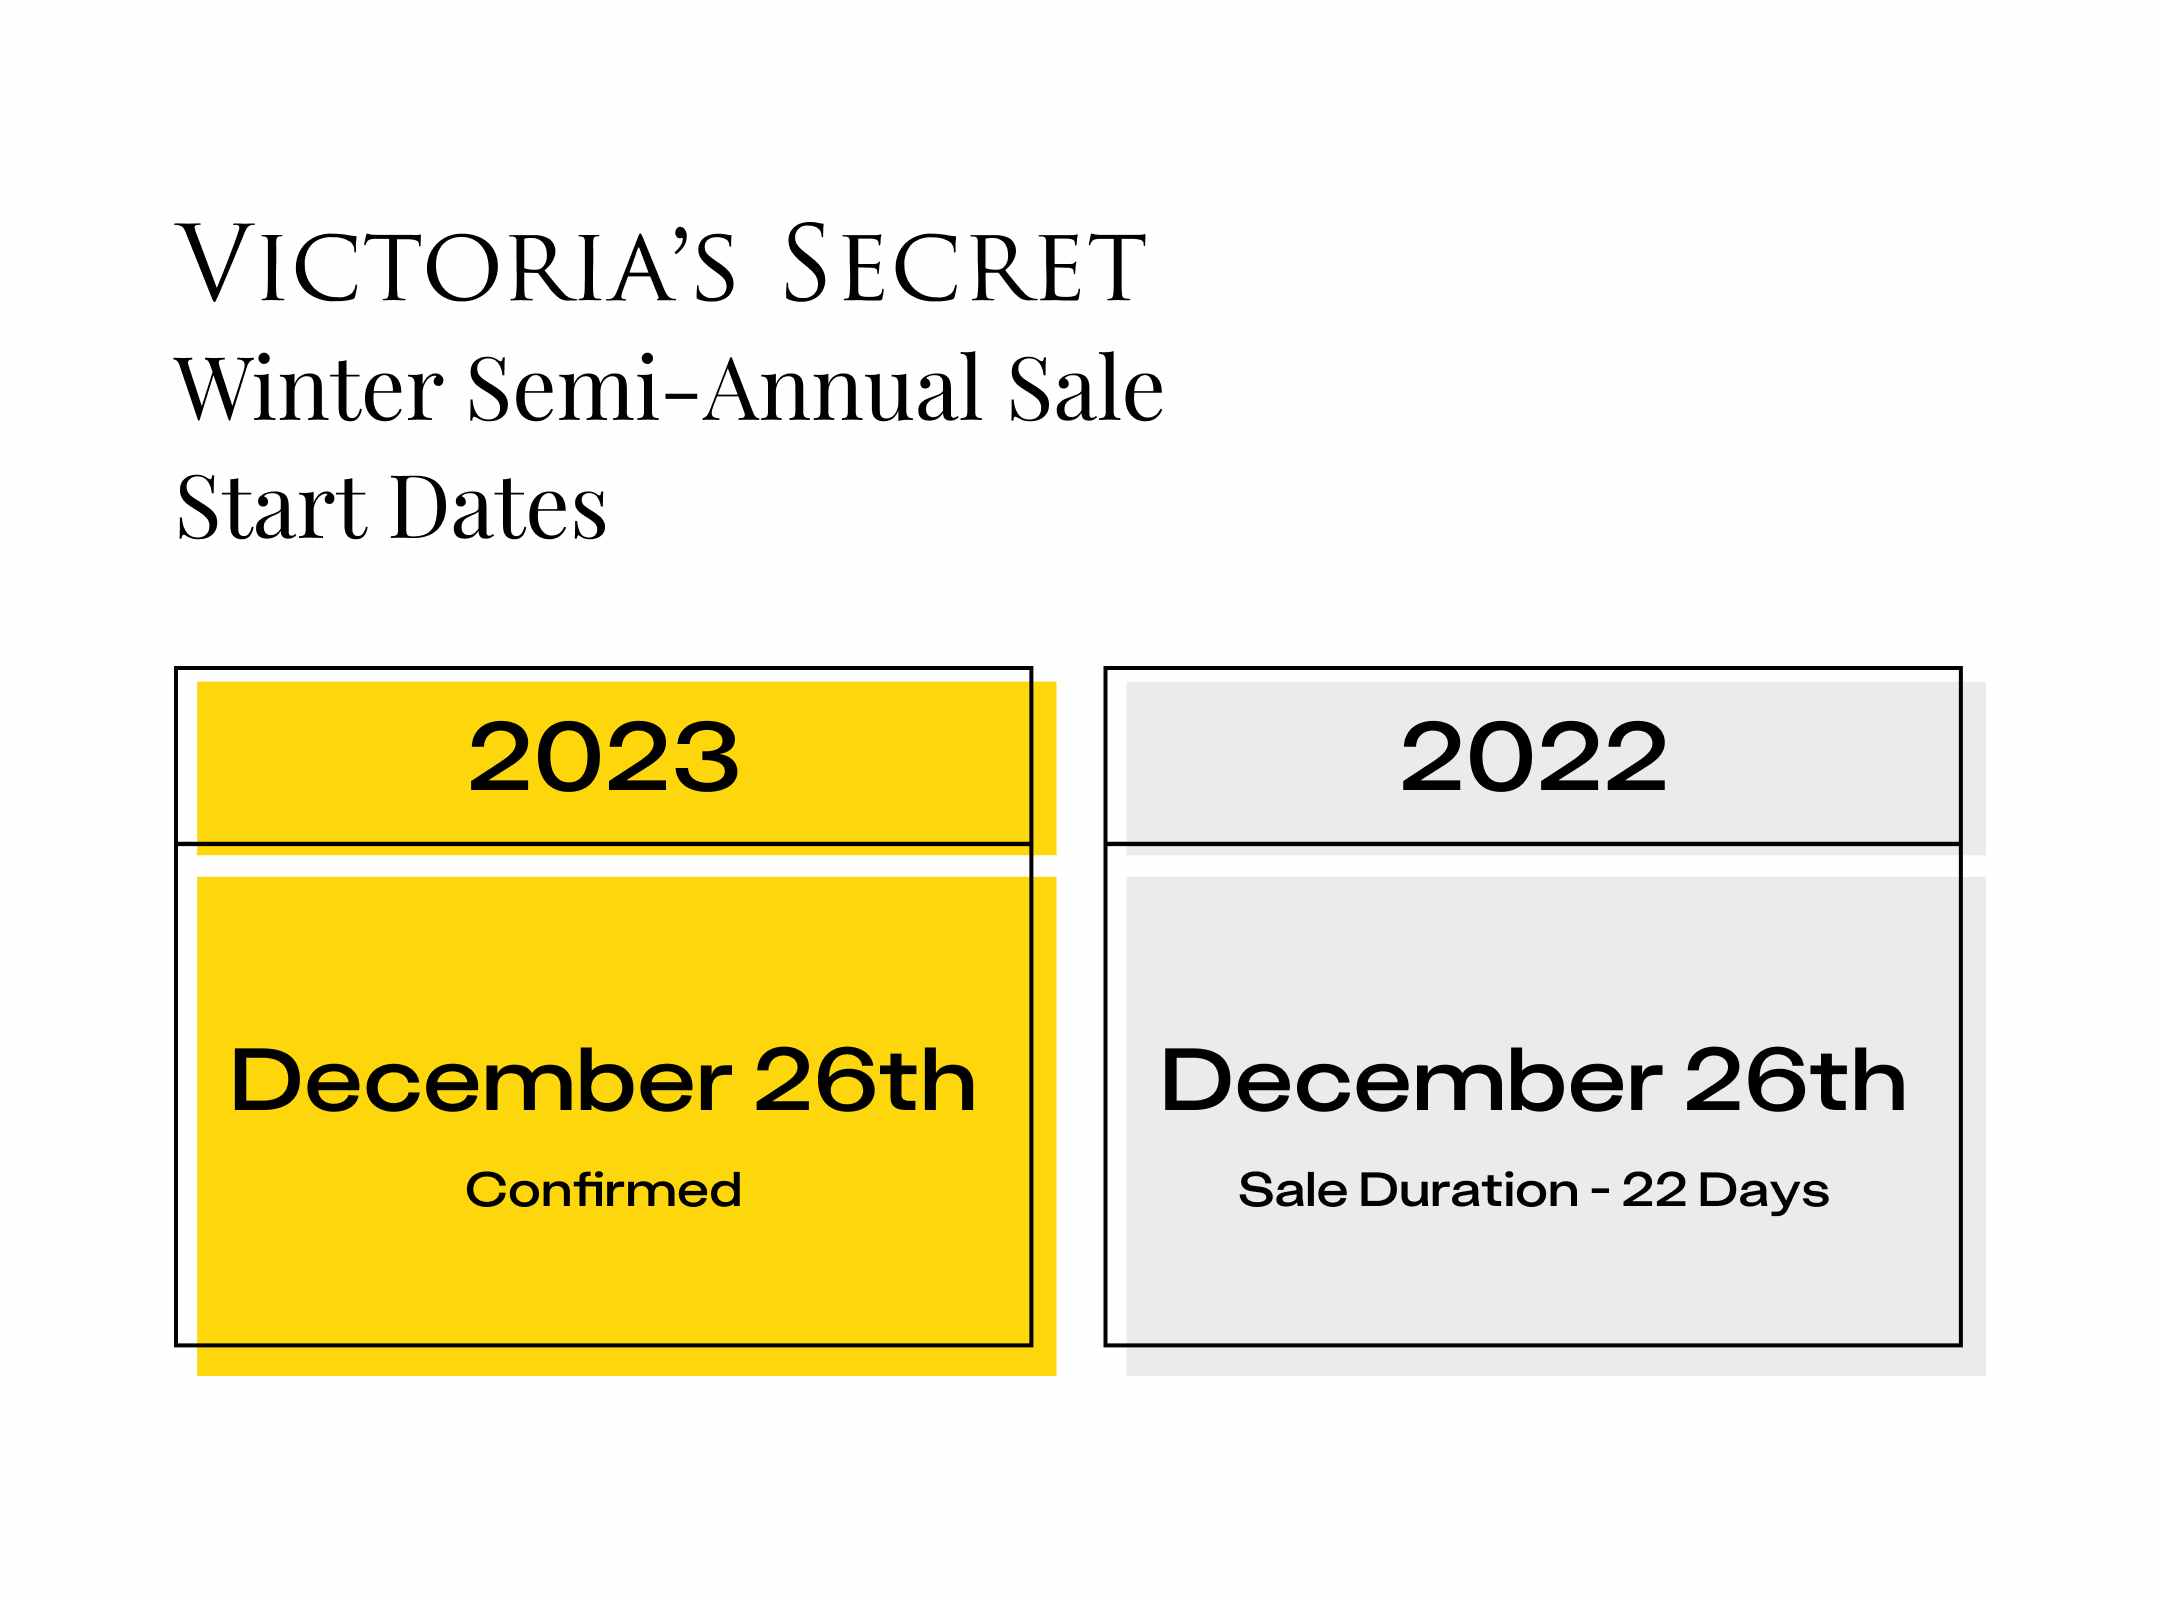 Victoria's Secret is Offering Big Discounts During its Semi-Annual